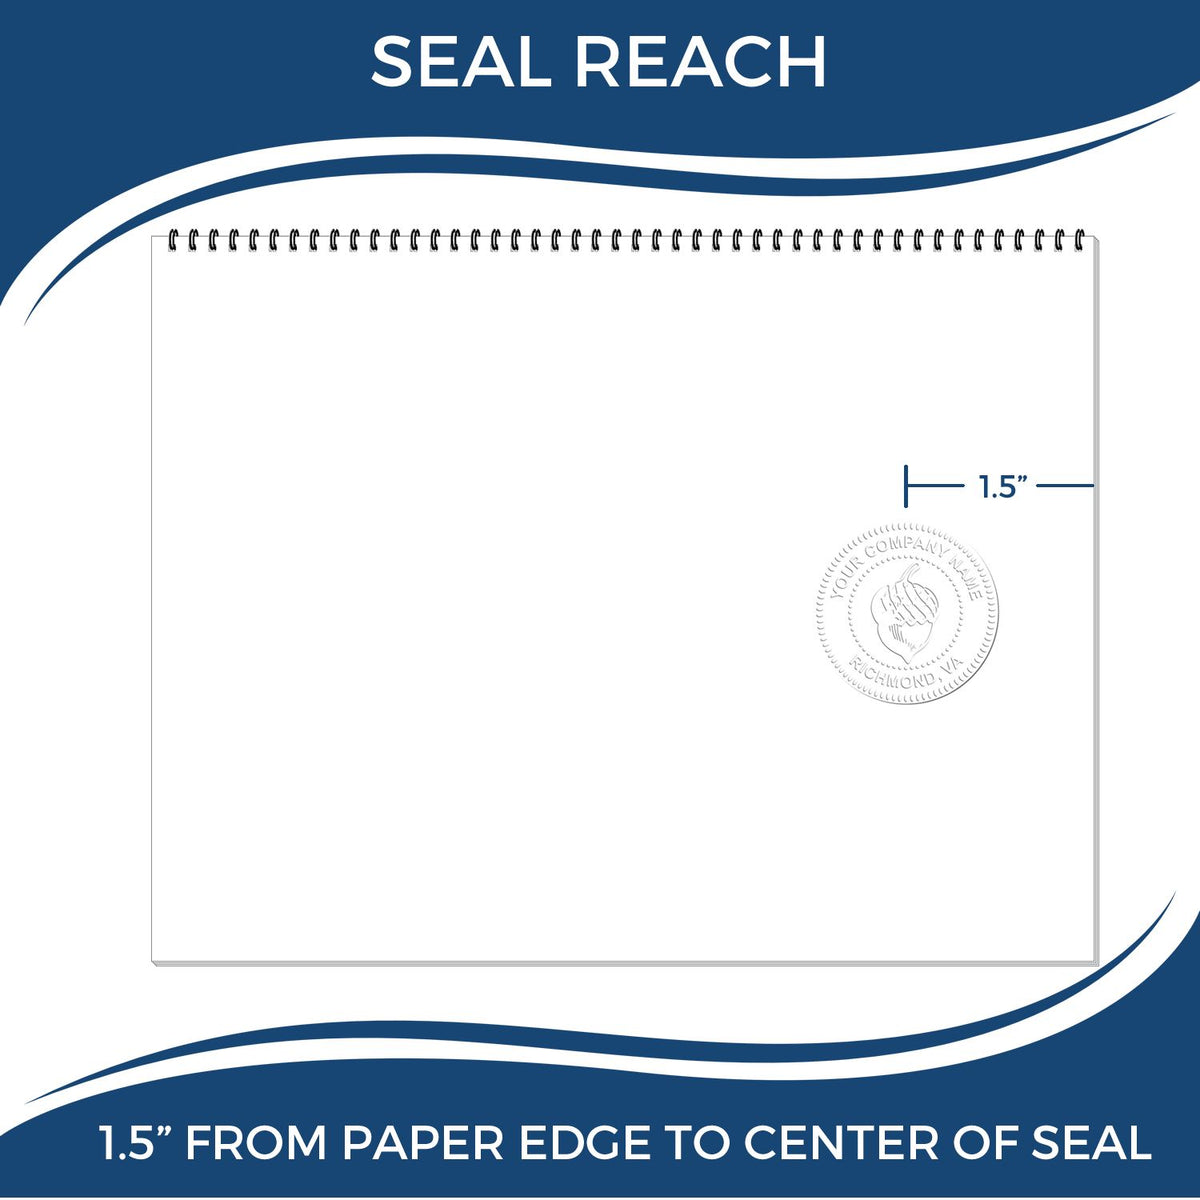 An infographic showing the seal reach which is represented by a ruler and a miniature seal image of the Handheld Delaware Professional Engineer Embosser